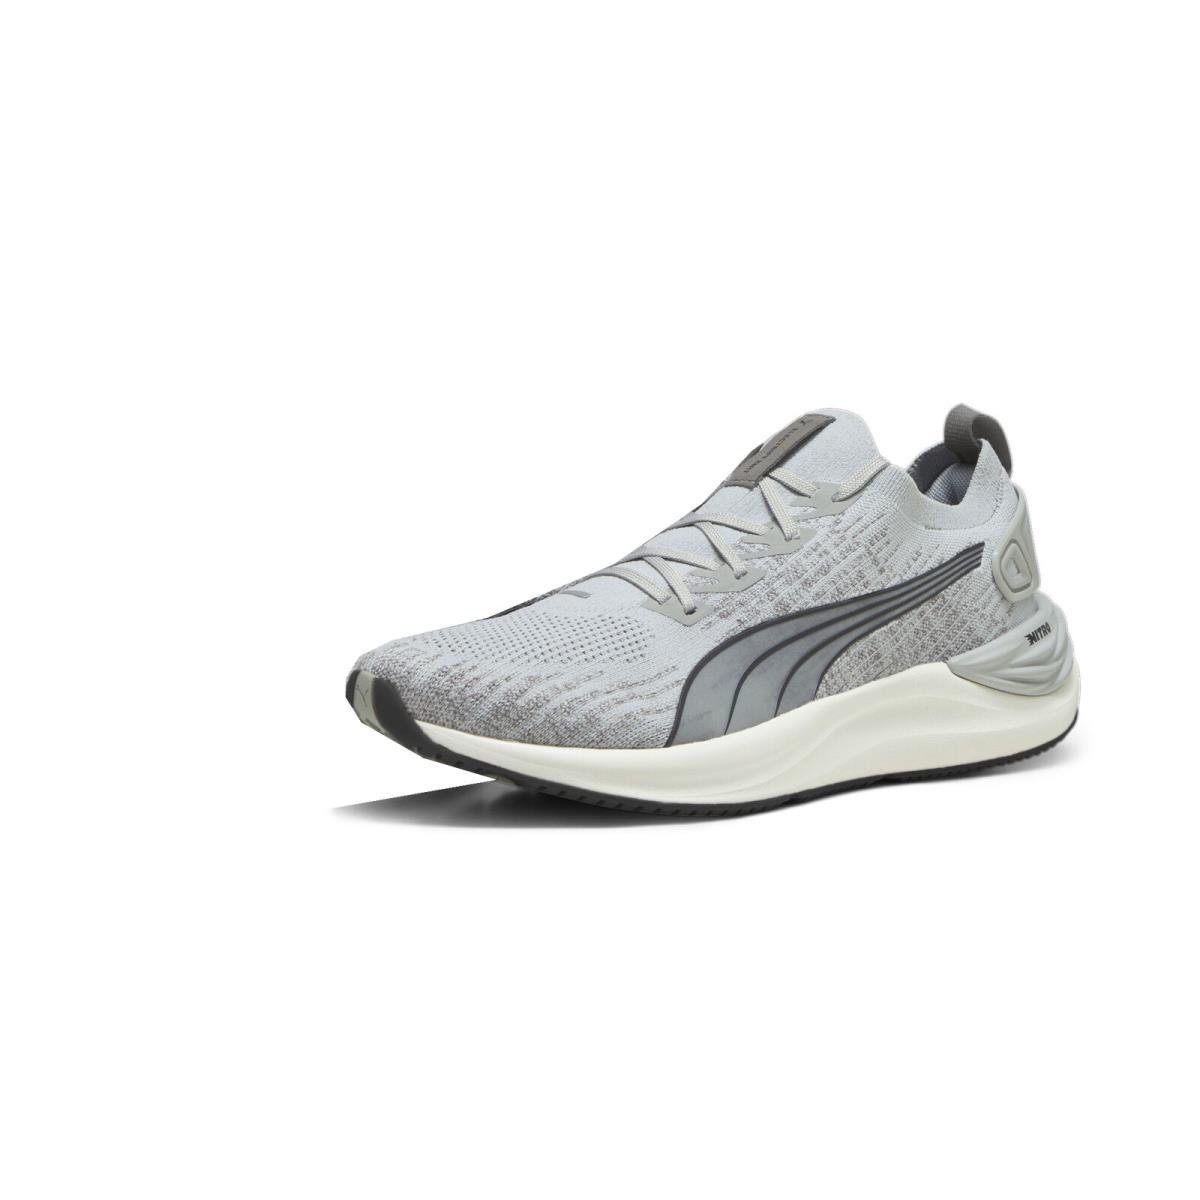 Puma Electrify Nitro 3 Knit Running Mens Grey Sneakers Athletic Shoes 37908405